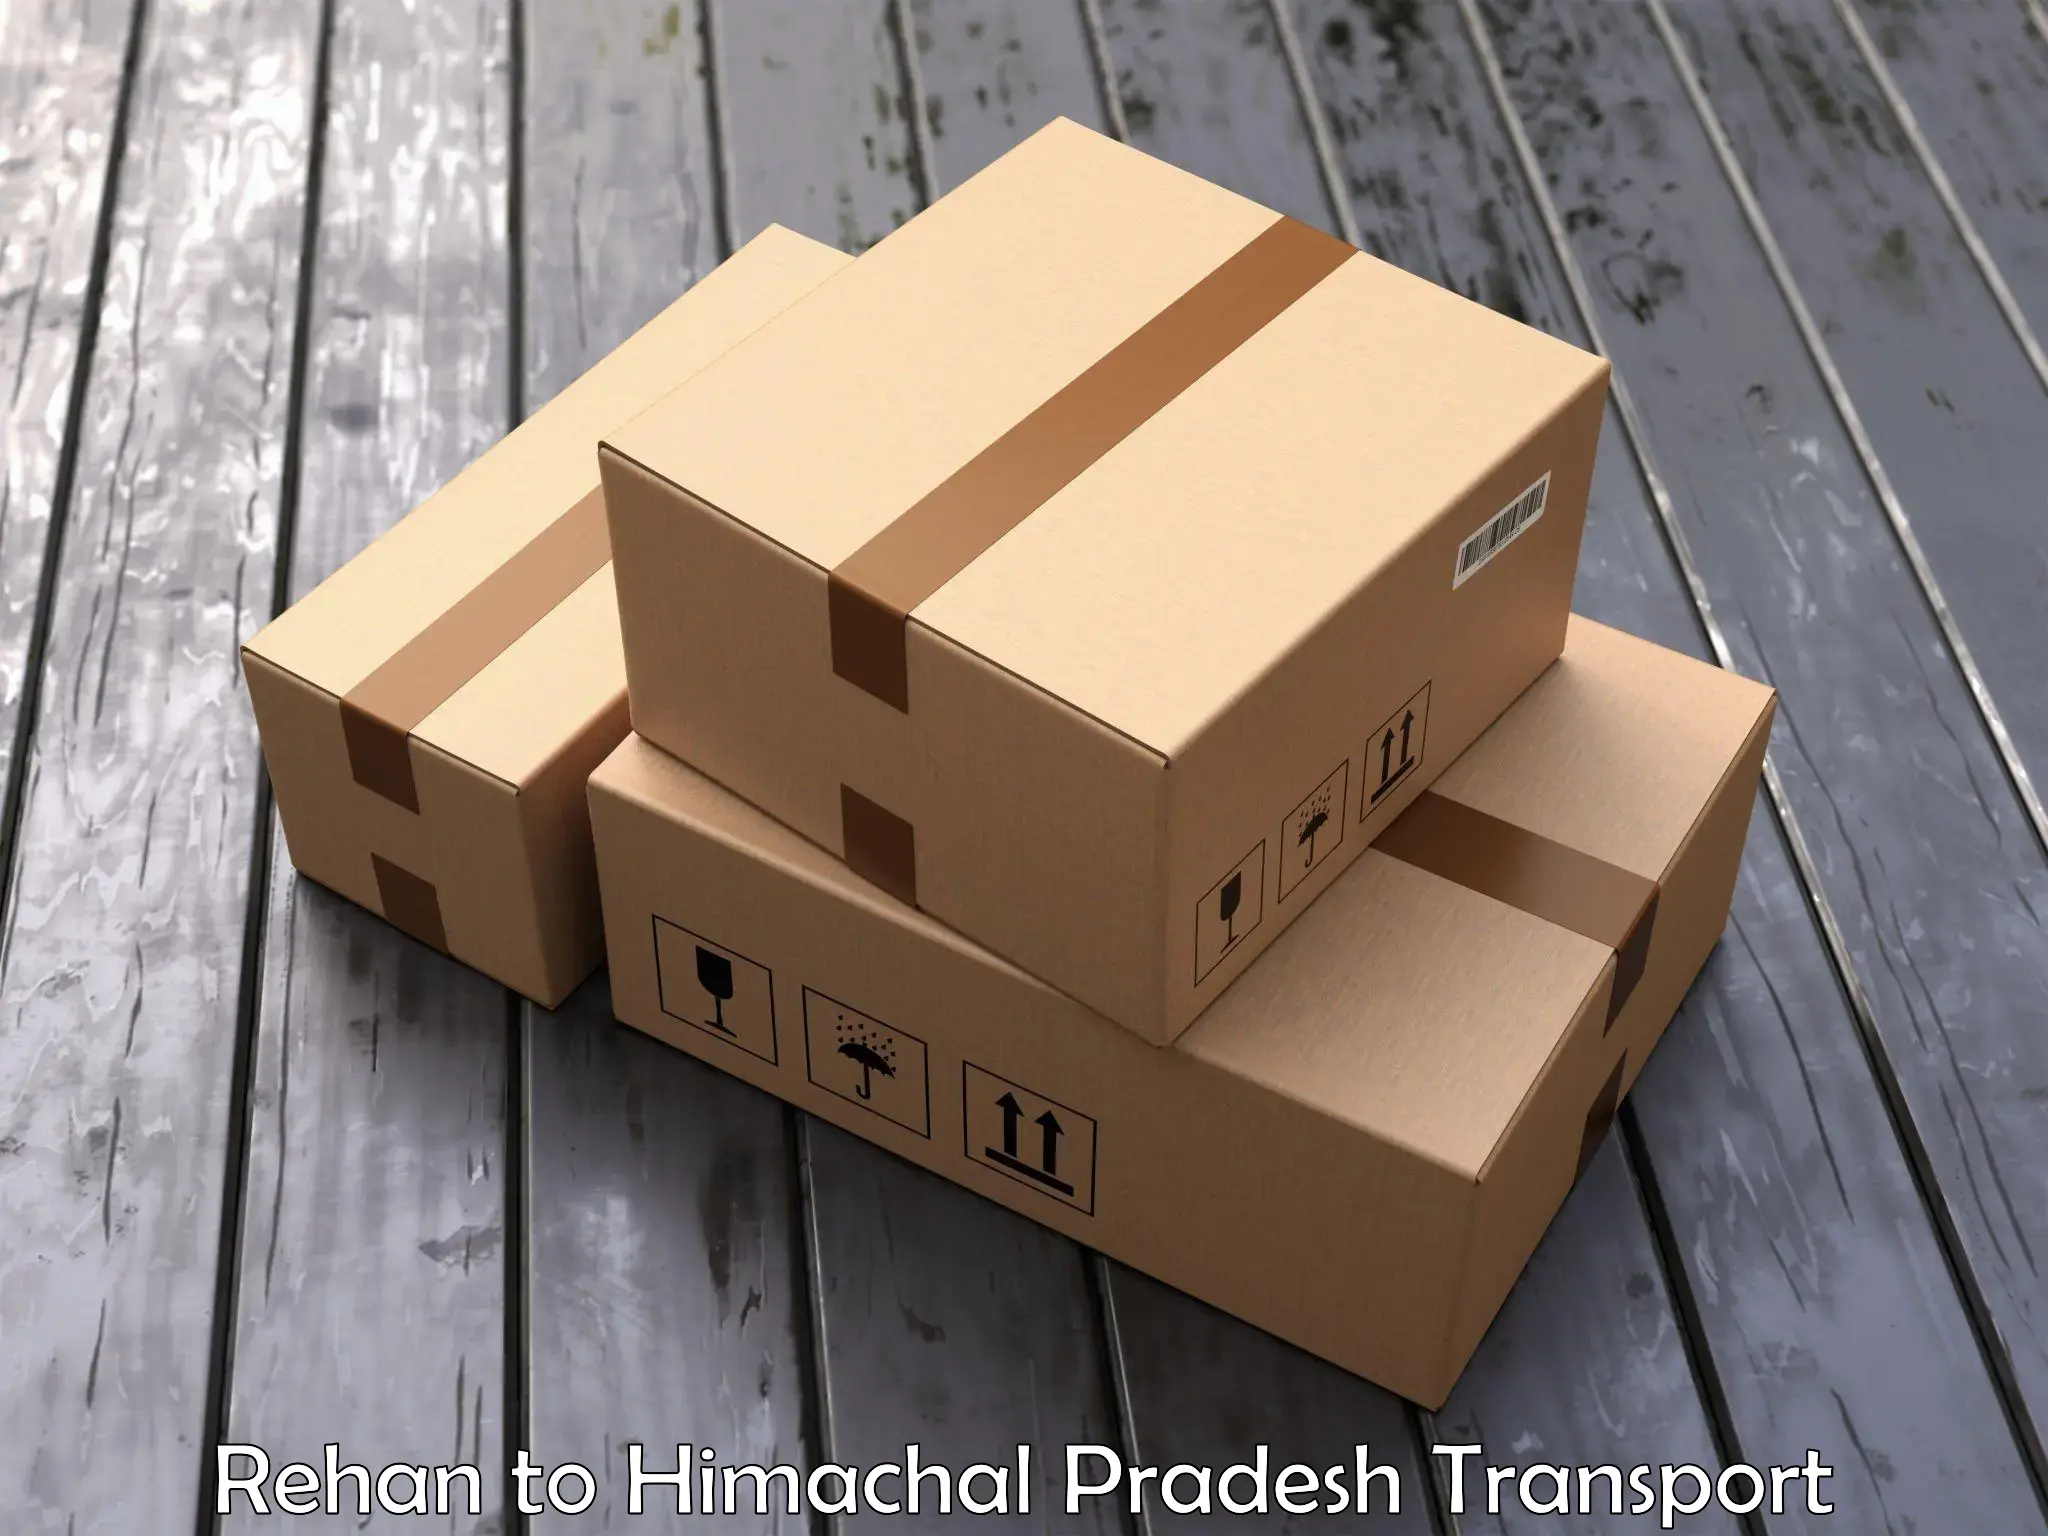 Parcel transport services Rehan to Darlaghat